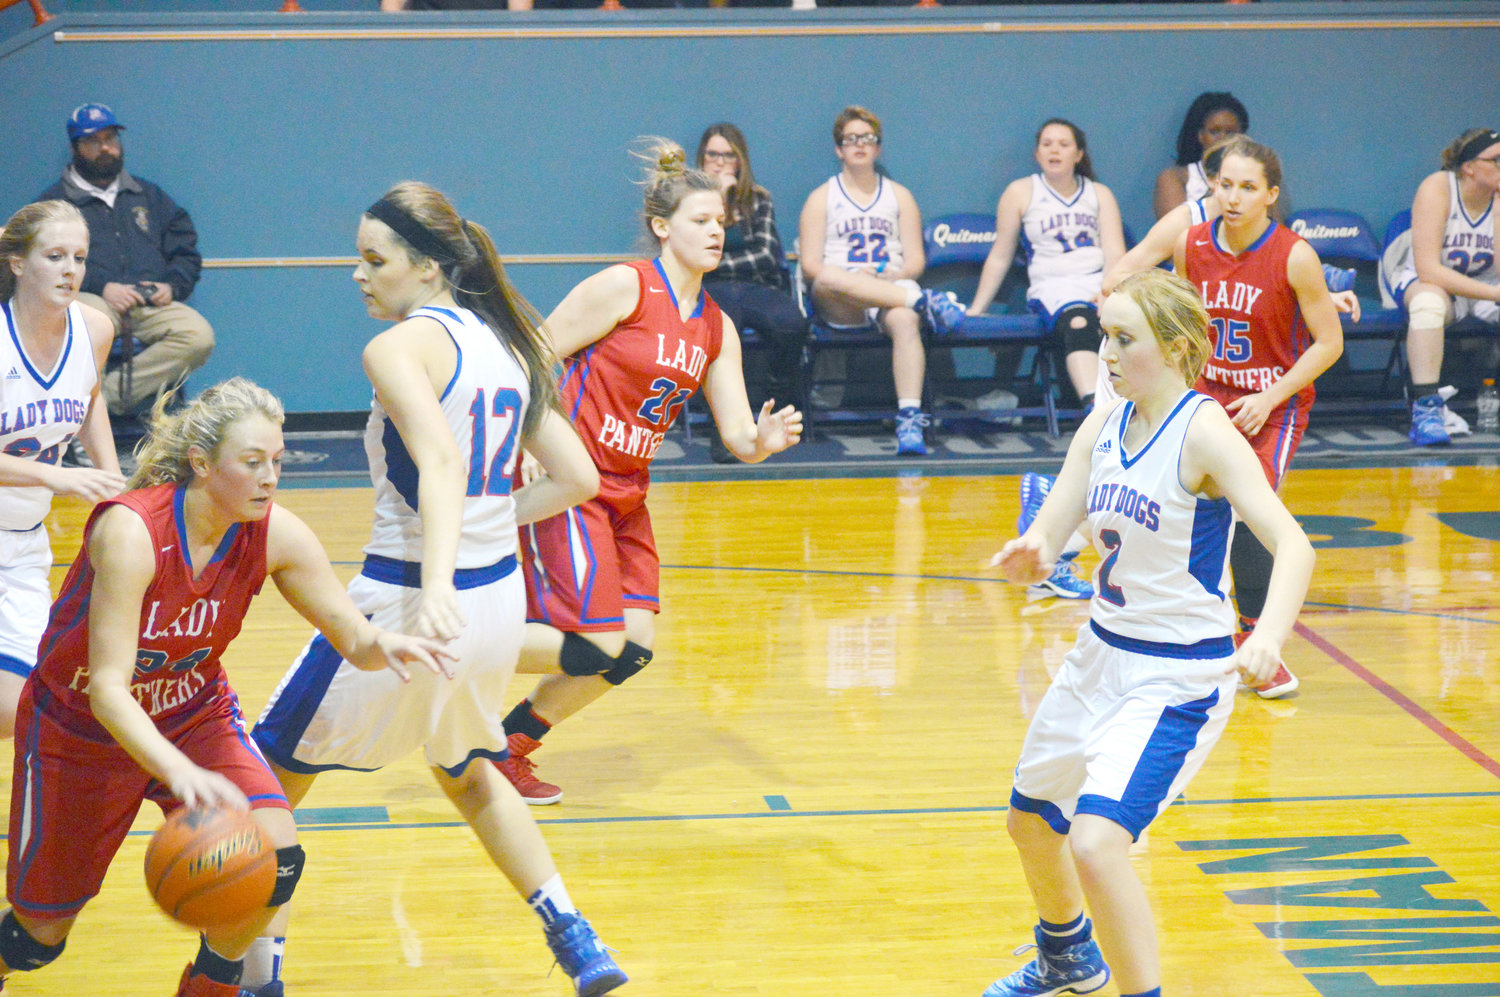 Alba-Golden’s Gracie Pendergrass (24) takes down a rebound and drives past Quitman’s Kaci Raley (12) as lady Bulldog Aubry Gilbreath (2) prepares to defend. Also in the photo are Lady Panthers Kenzie Chadwick (21) and Ashlyn Rogers (15). (Photo by Larry Tucker)